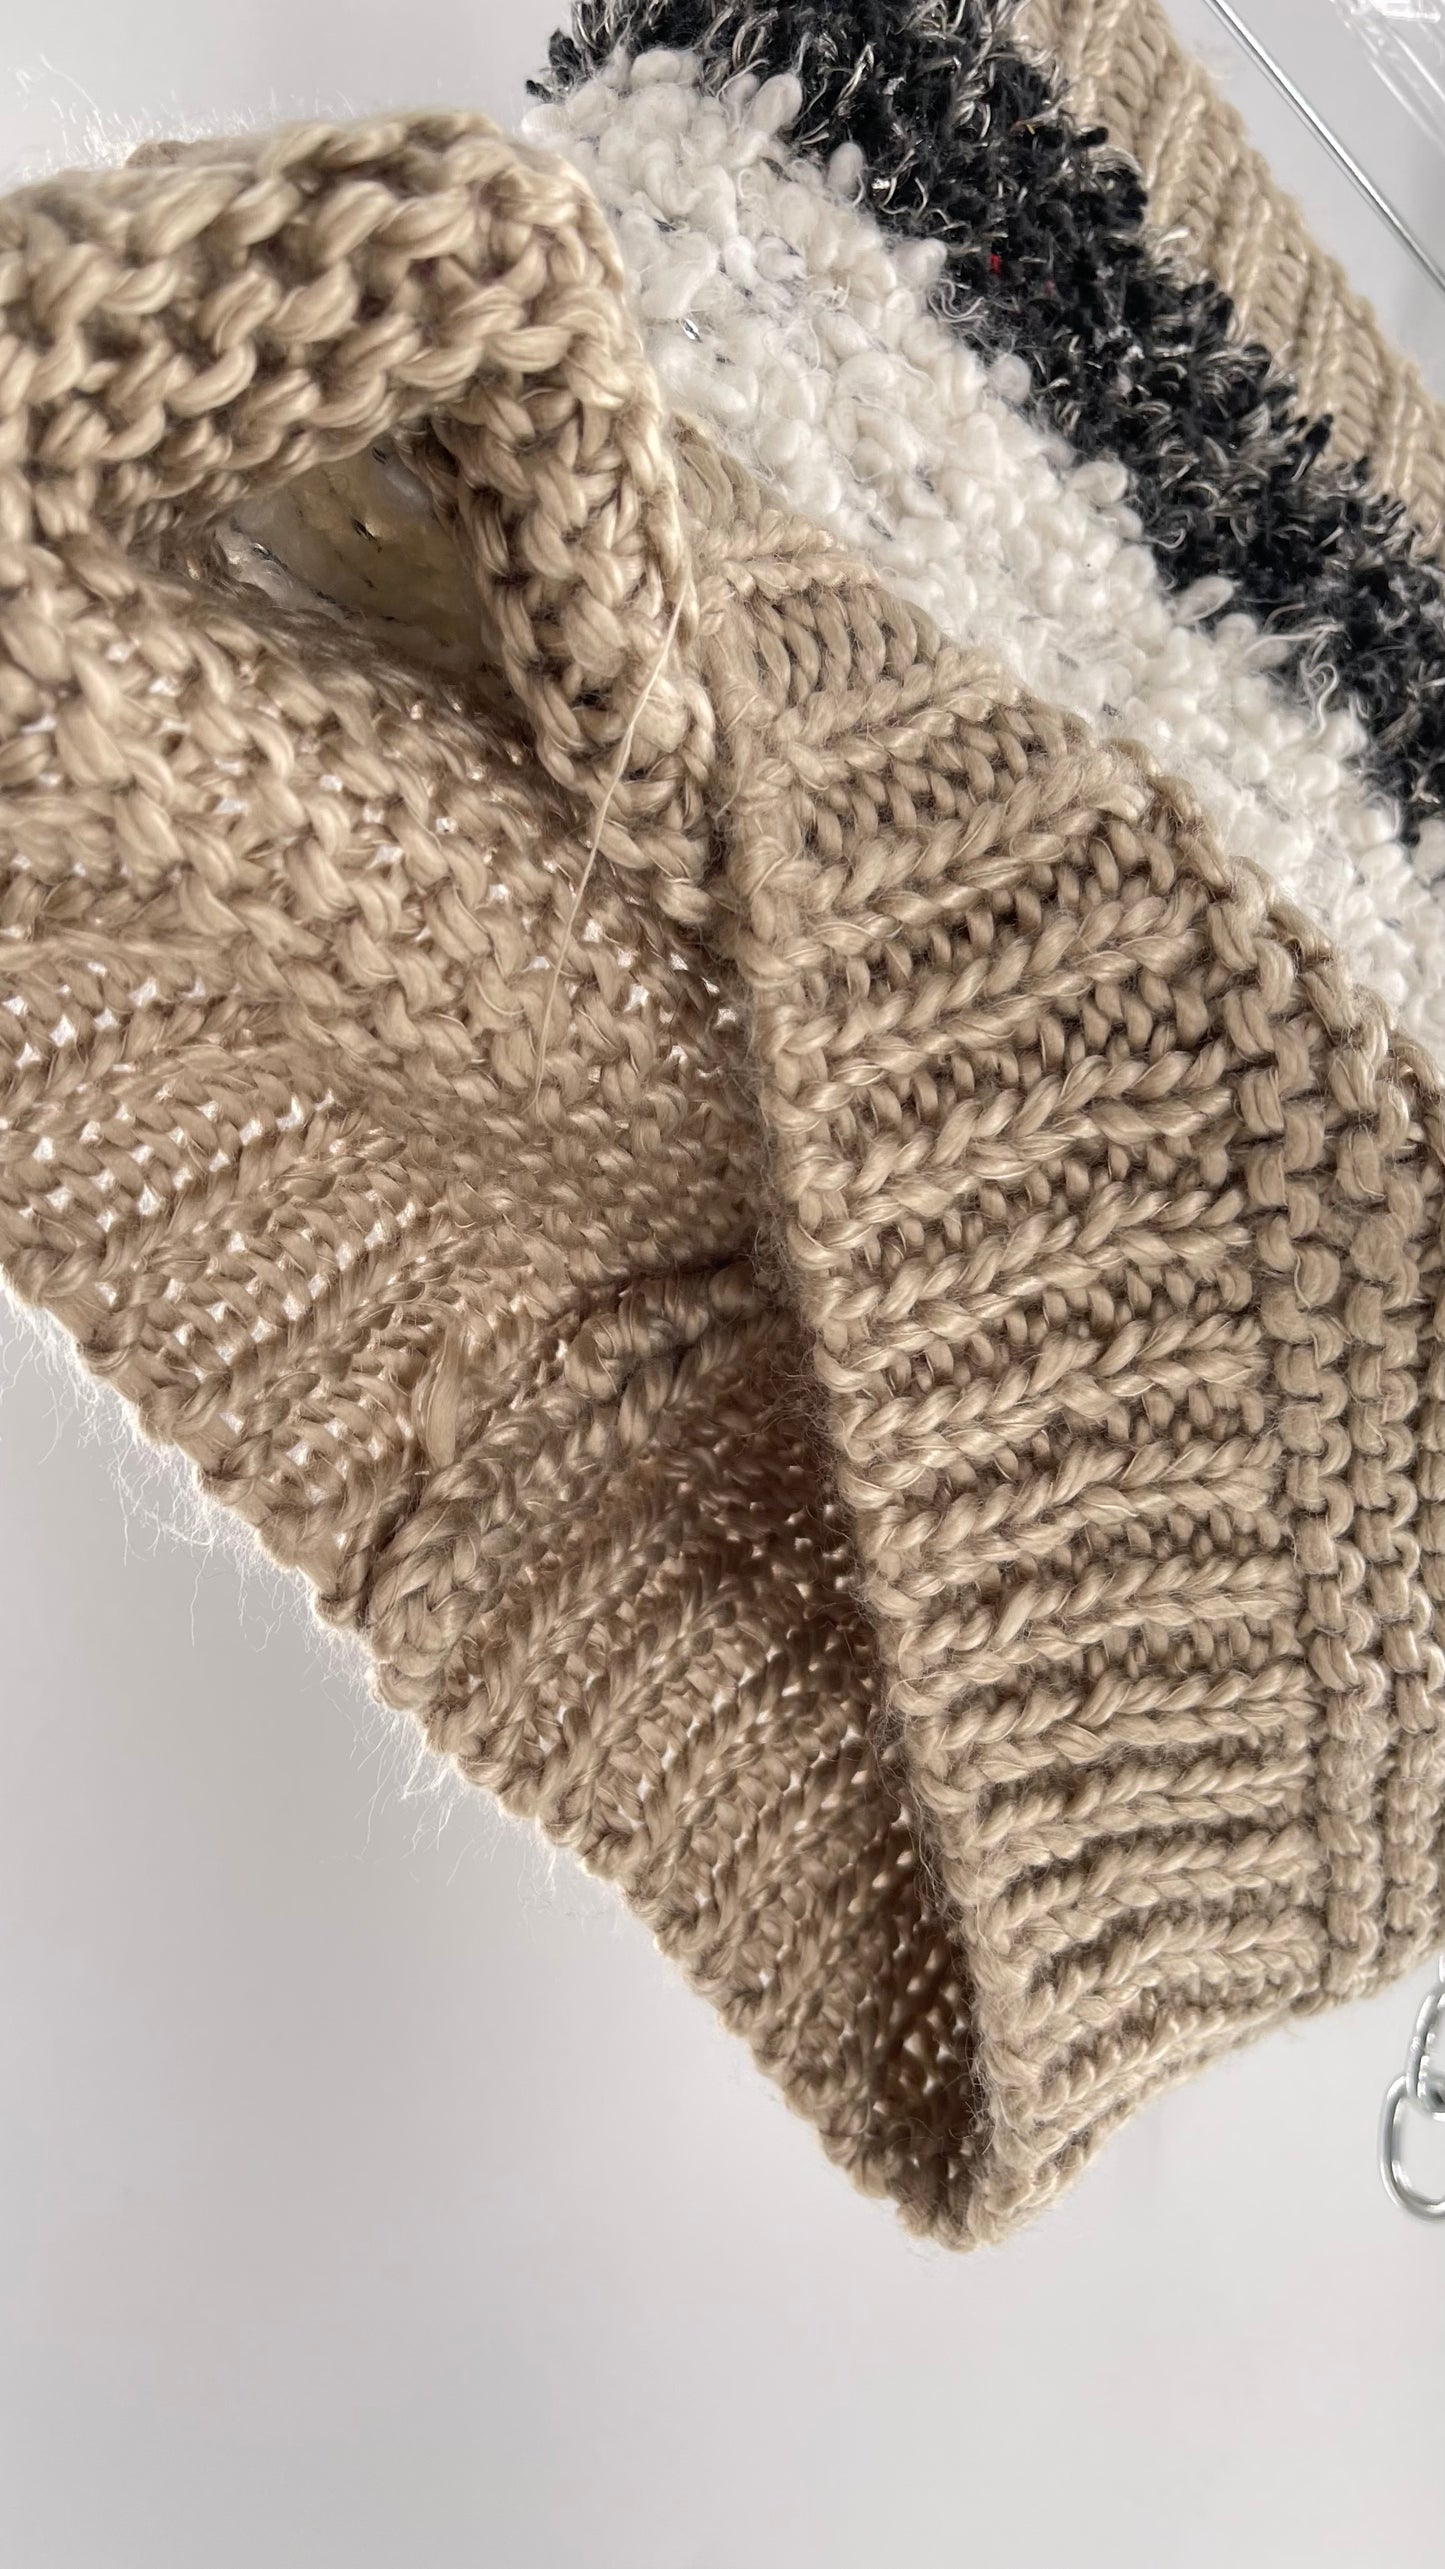 Anthropologie Sleeping on Snow Neutrals Knit Infinity Scarf is